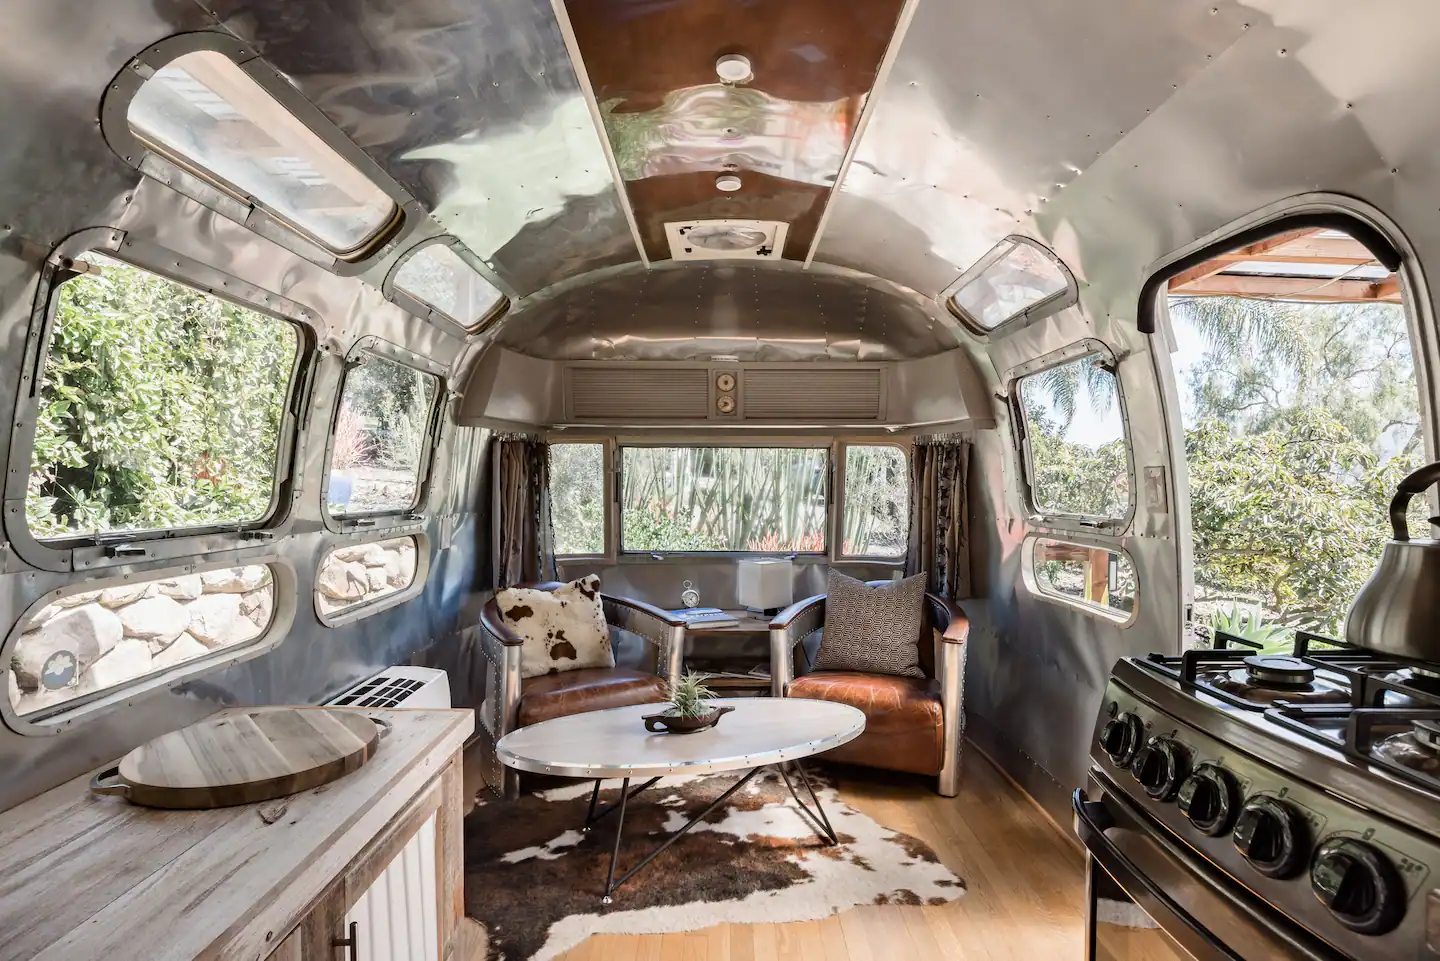 Iconic 1974 Airstream on an Organic Ranch